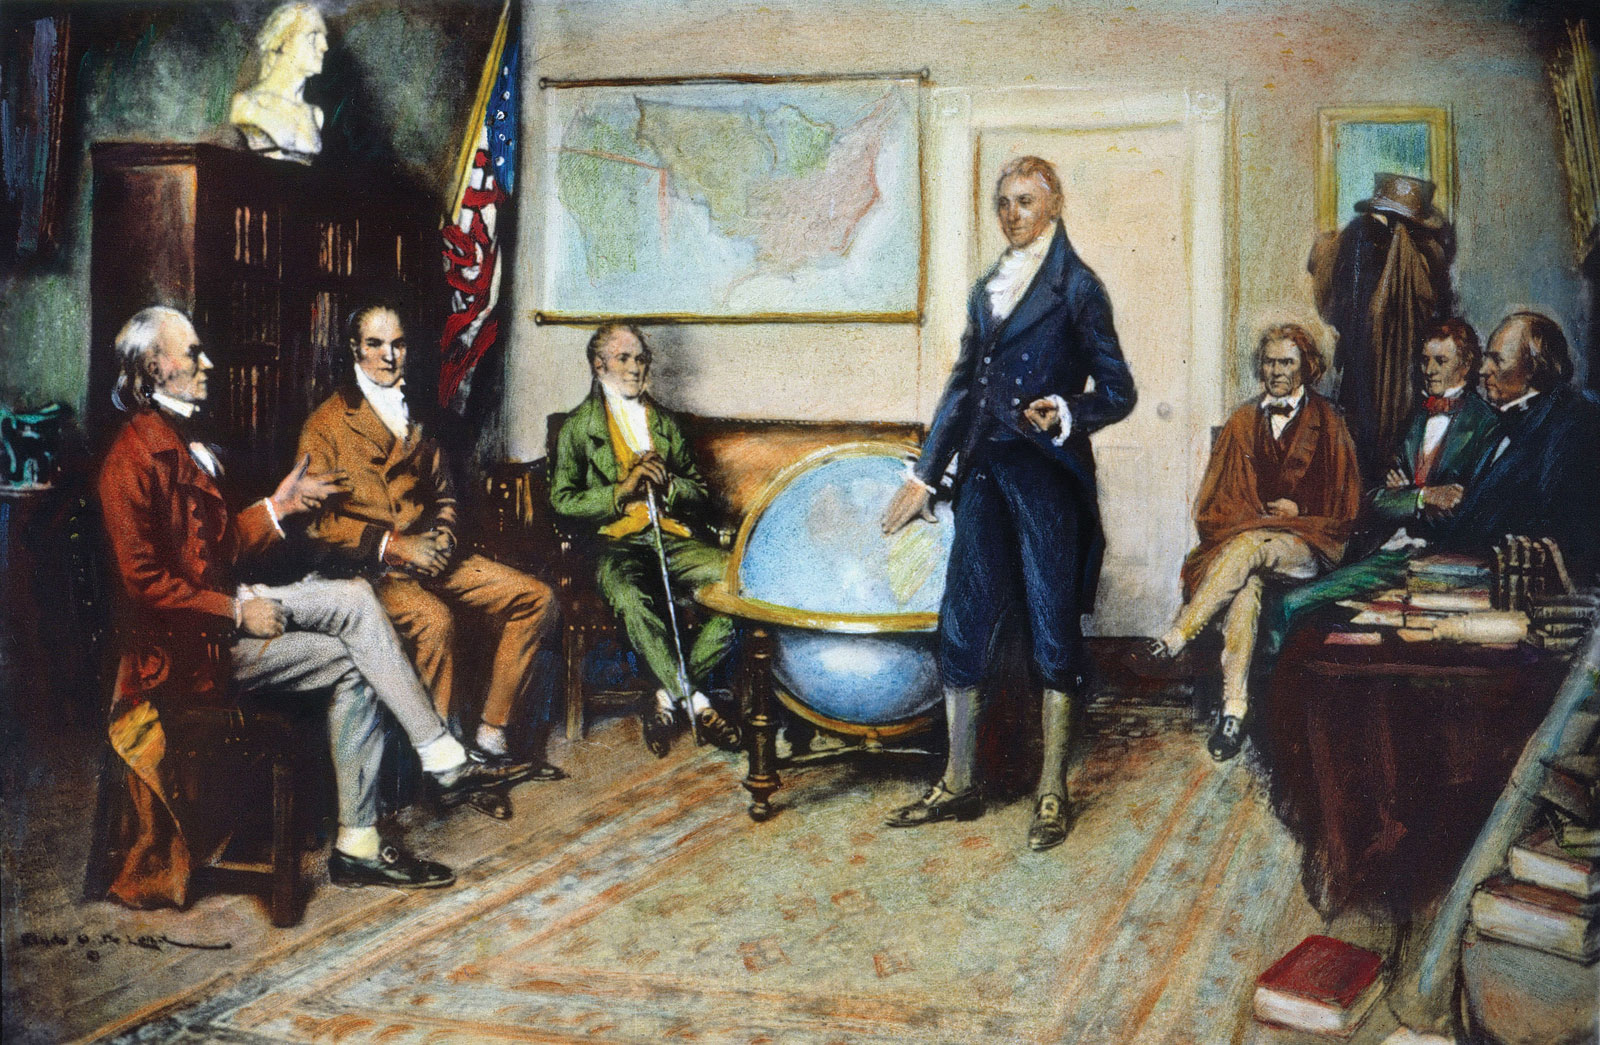 Photo: "The Birth of the Monroe Doctrine" by Clyde O. DeLand 1912 ©Public Domain.